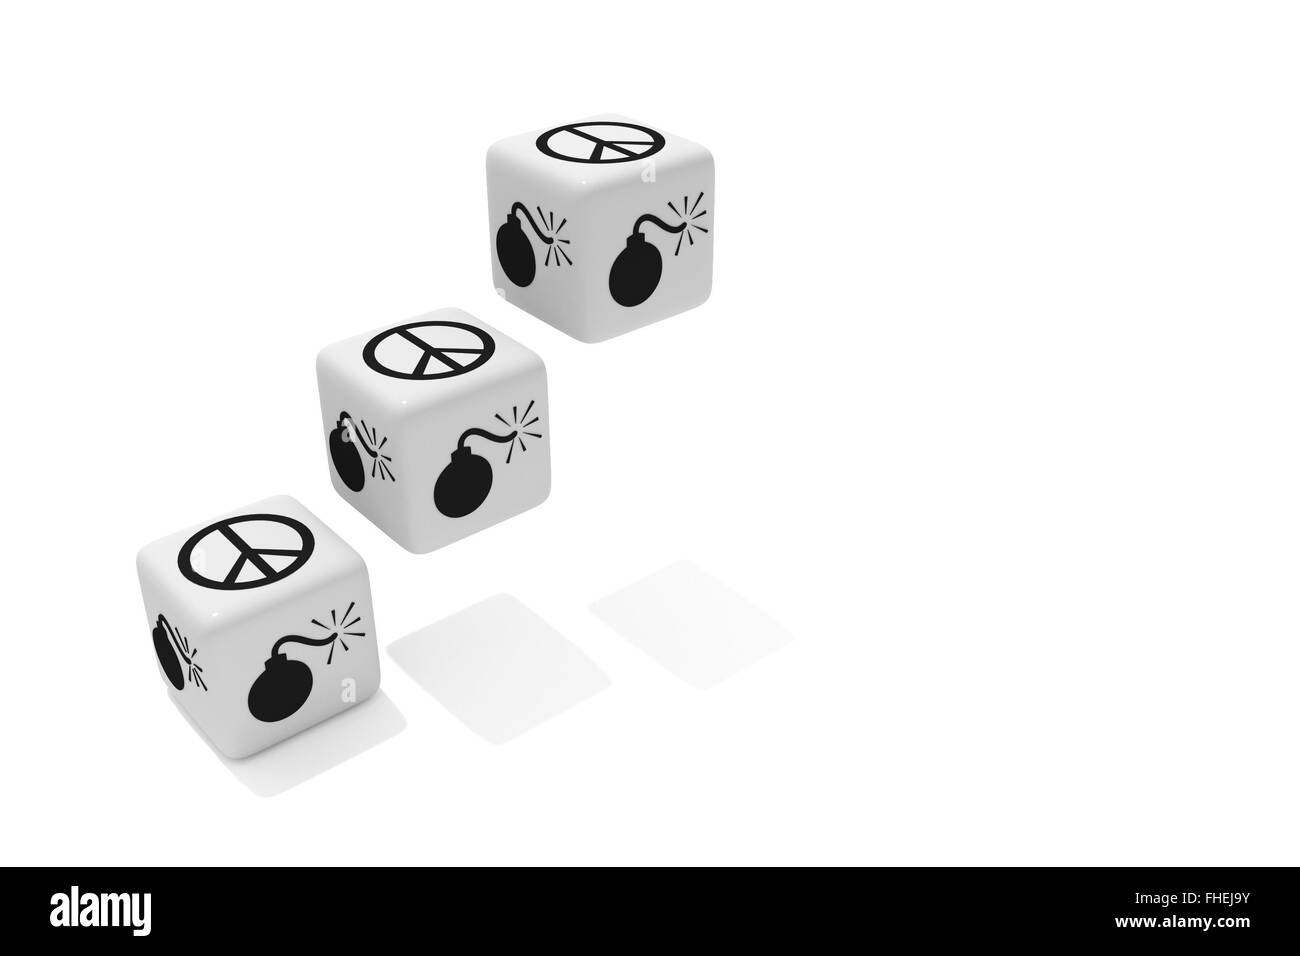 War or Peace: white dice on a white background Stock Photo